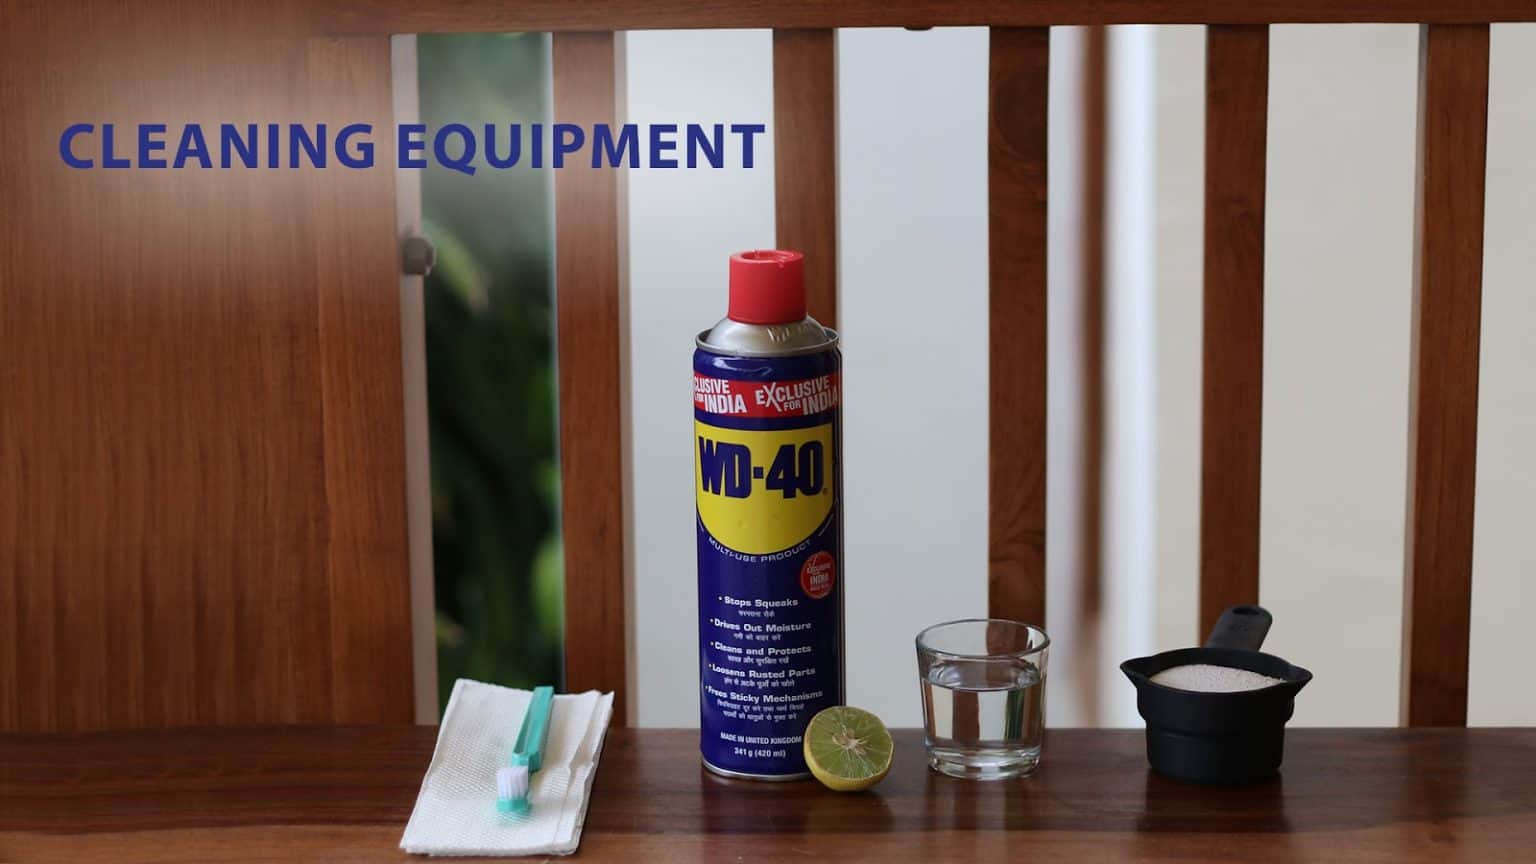 How to clean mold from your fridge? - WD-40 India